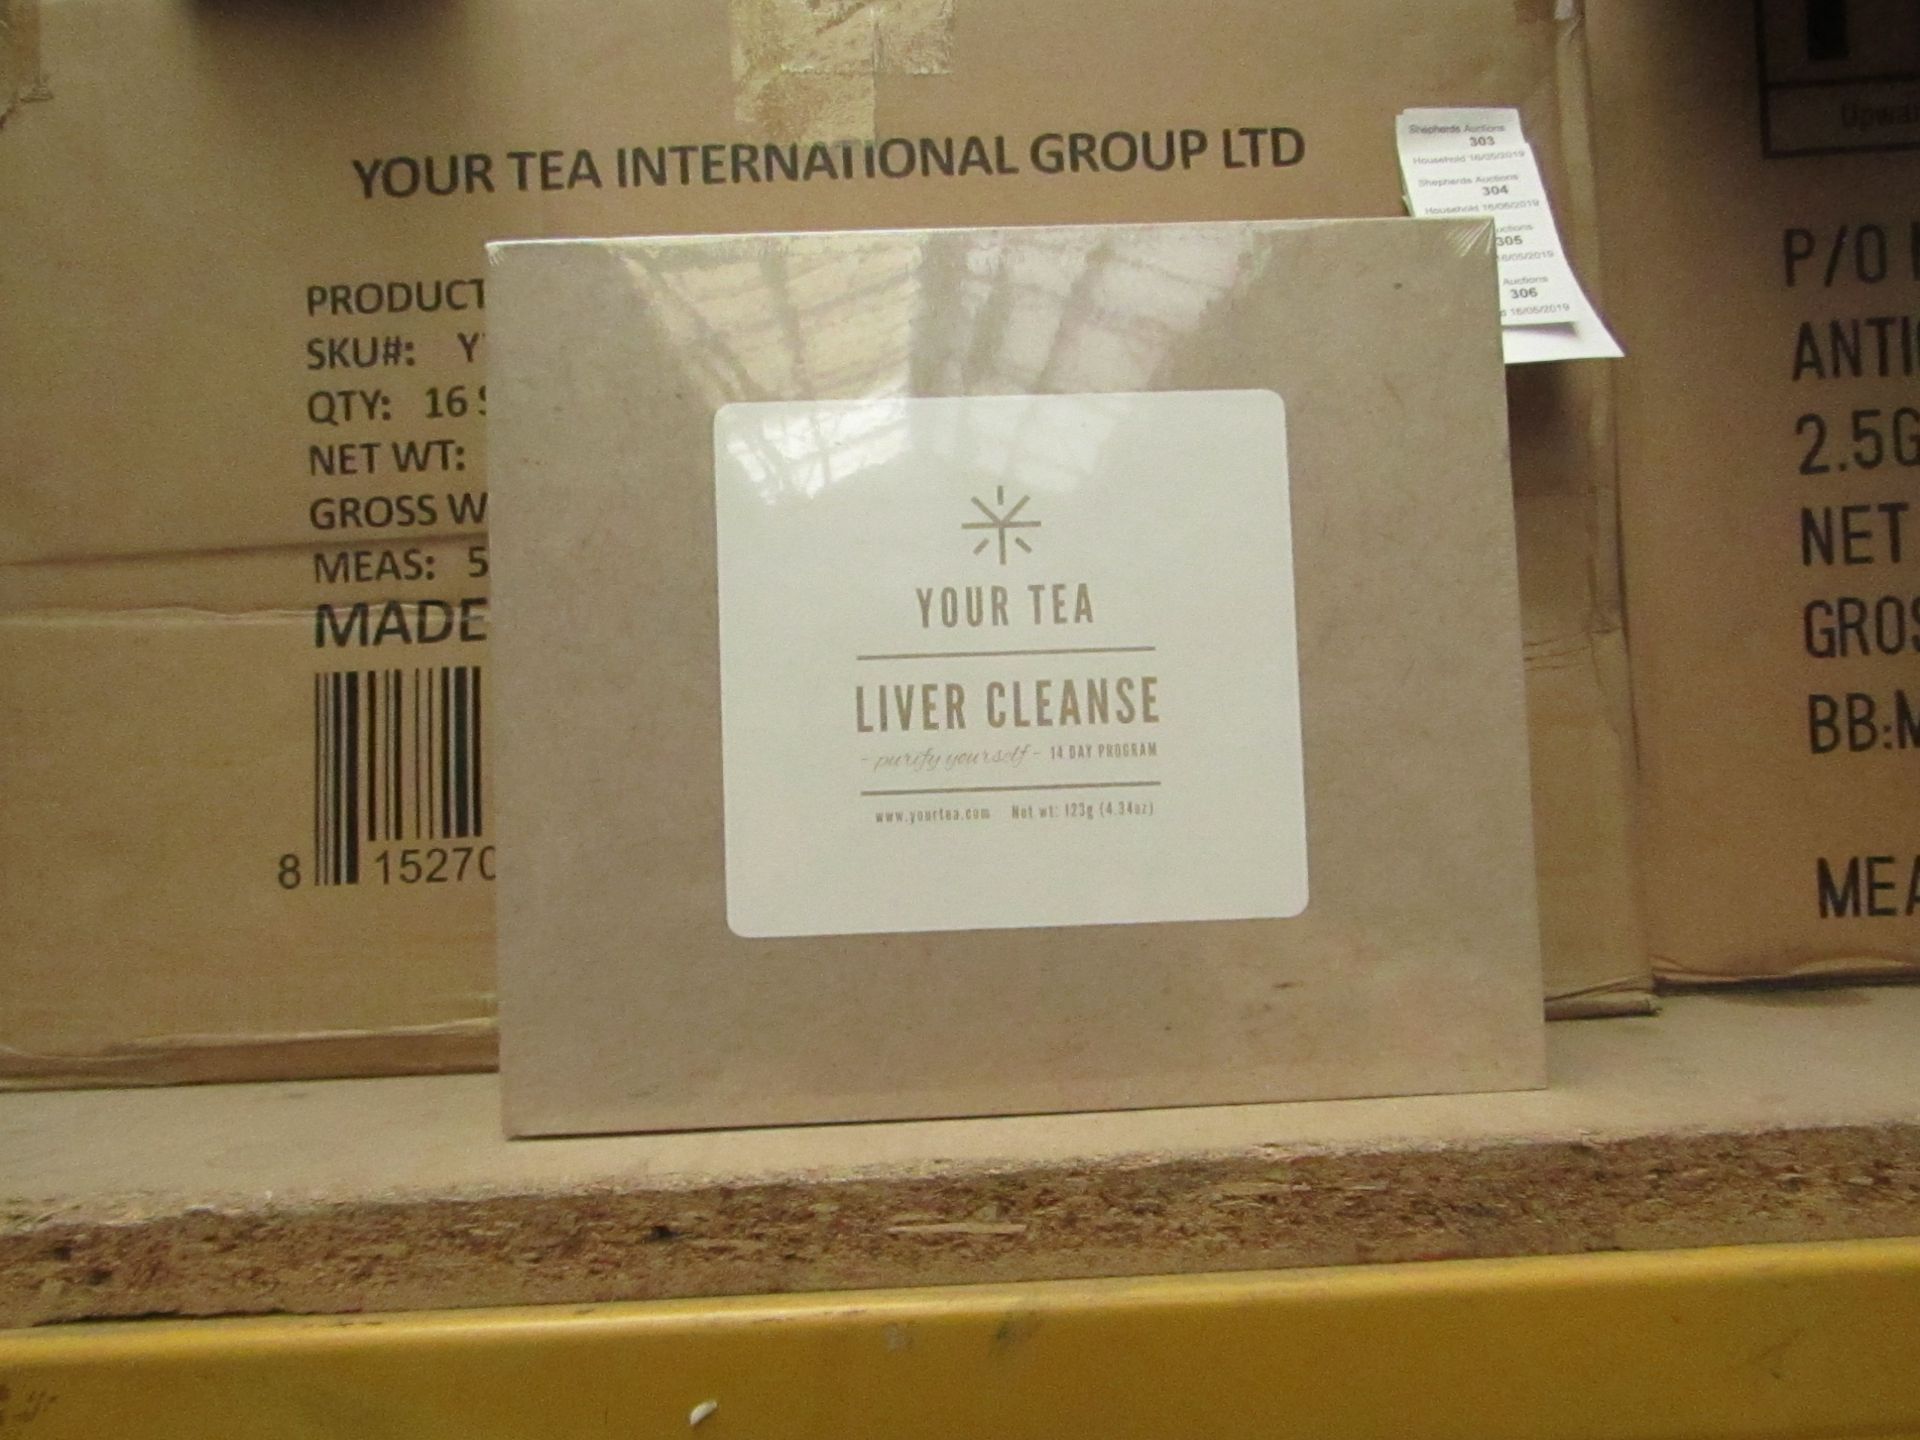 4x Boxes of 50 Your Tea Liver Cleanse set, all new and boxed.